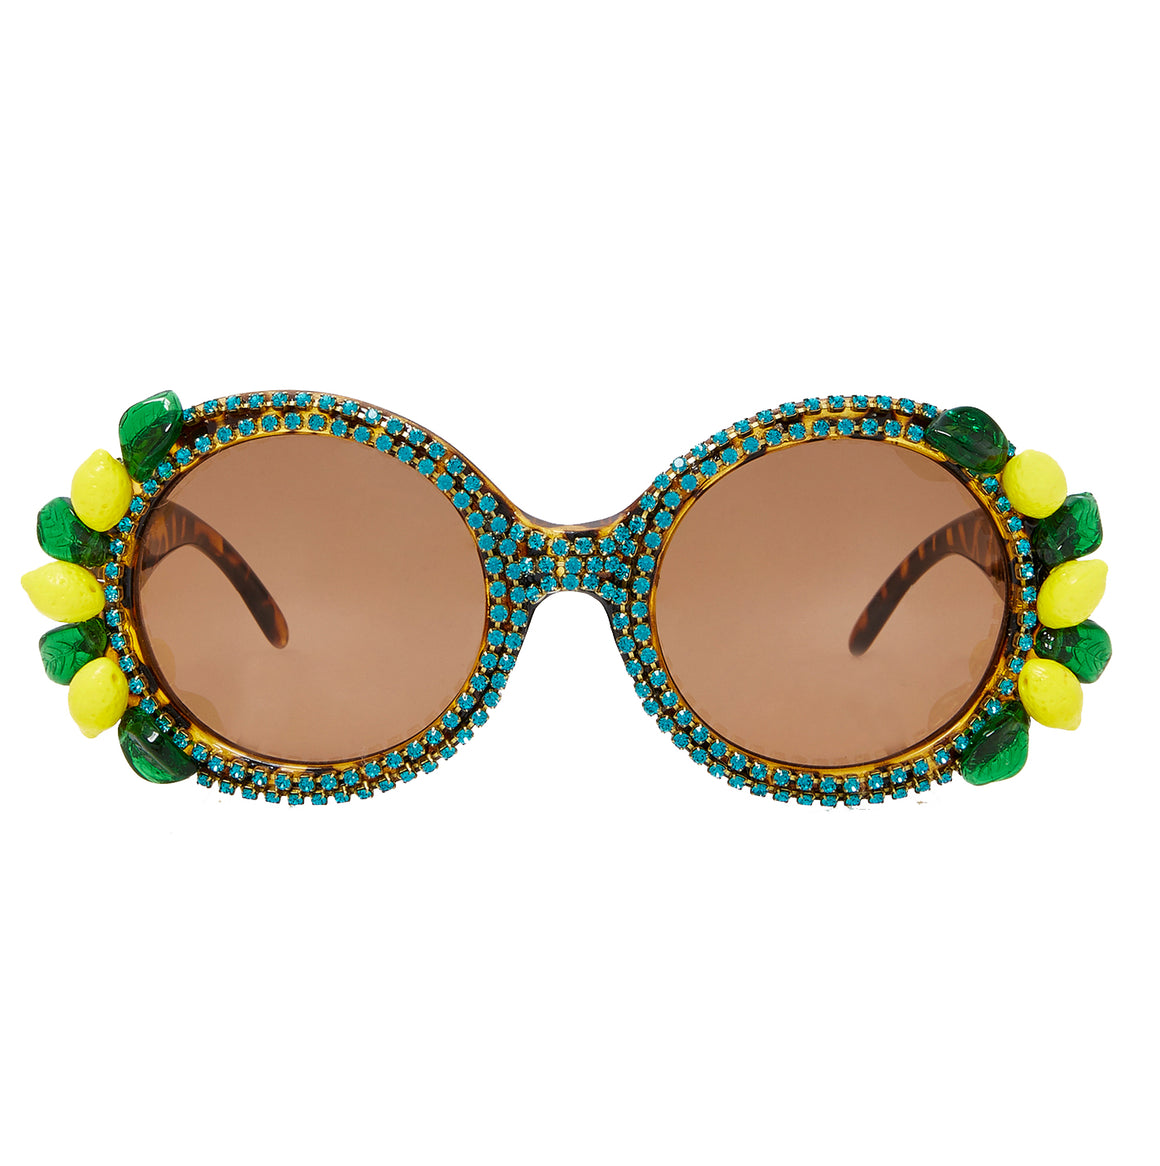 A-Morir Eyewear - Blue Lagoon Round Frame With Crystal Chain and Glass Fruit Beads